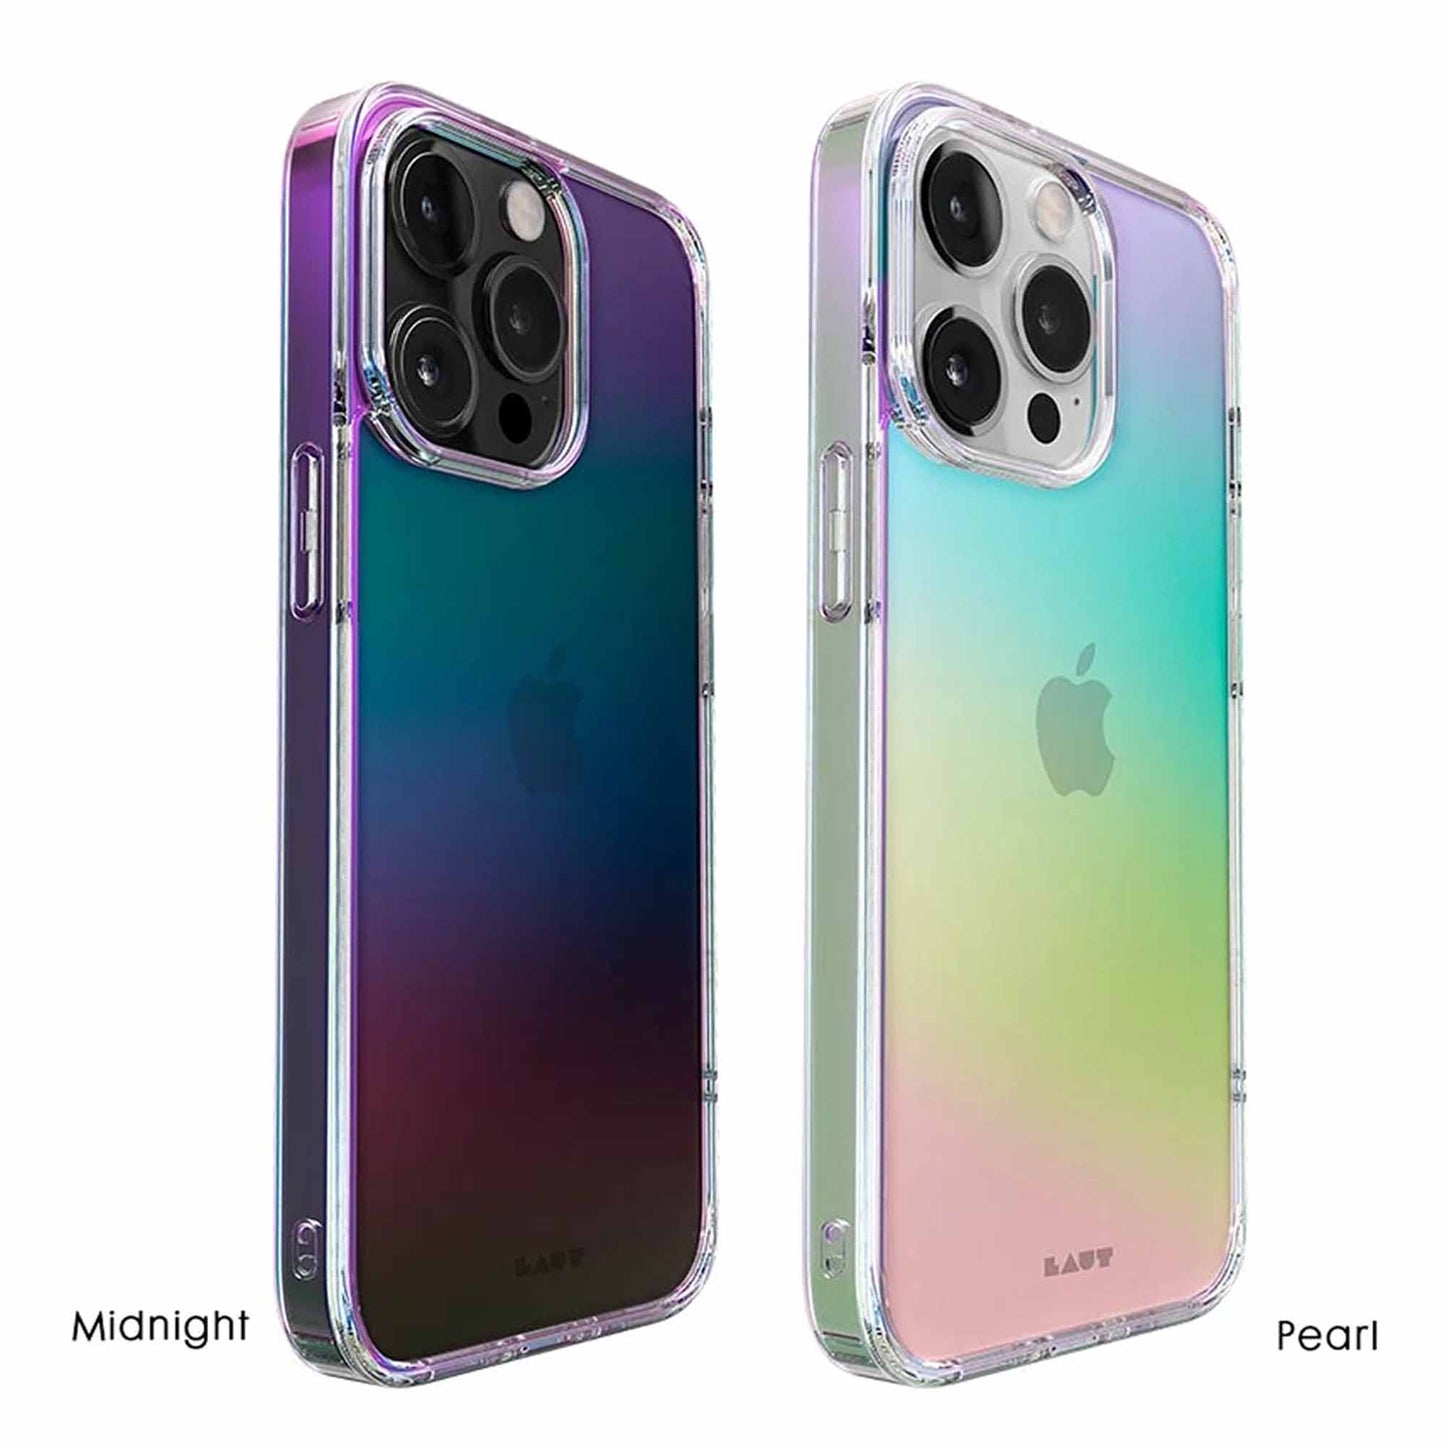 LAUT HOLO Case for iPhone 13 Pro 6.1" 5G - Midnight (Barcode: 4895206924801 )